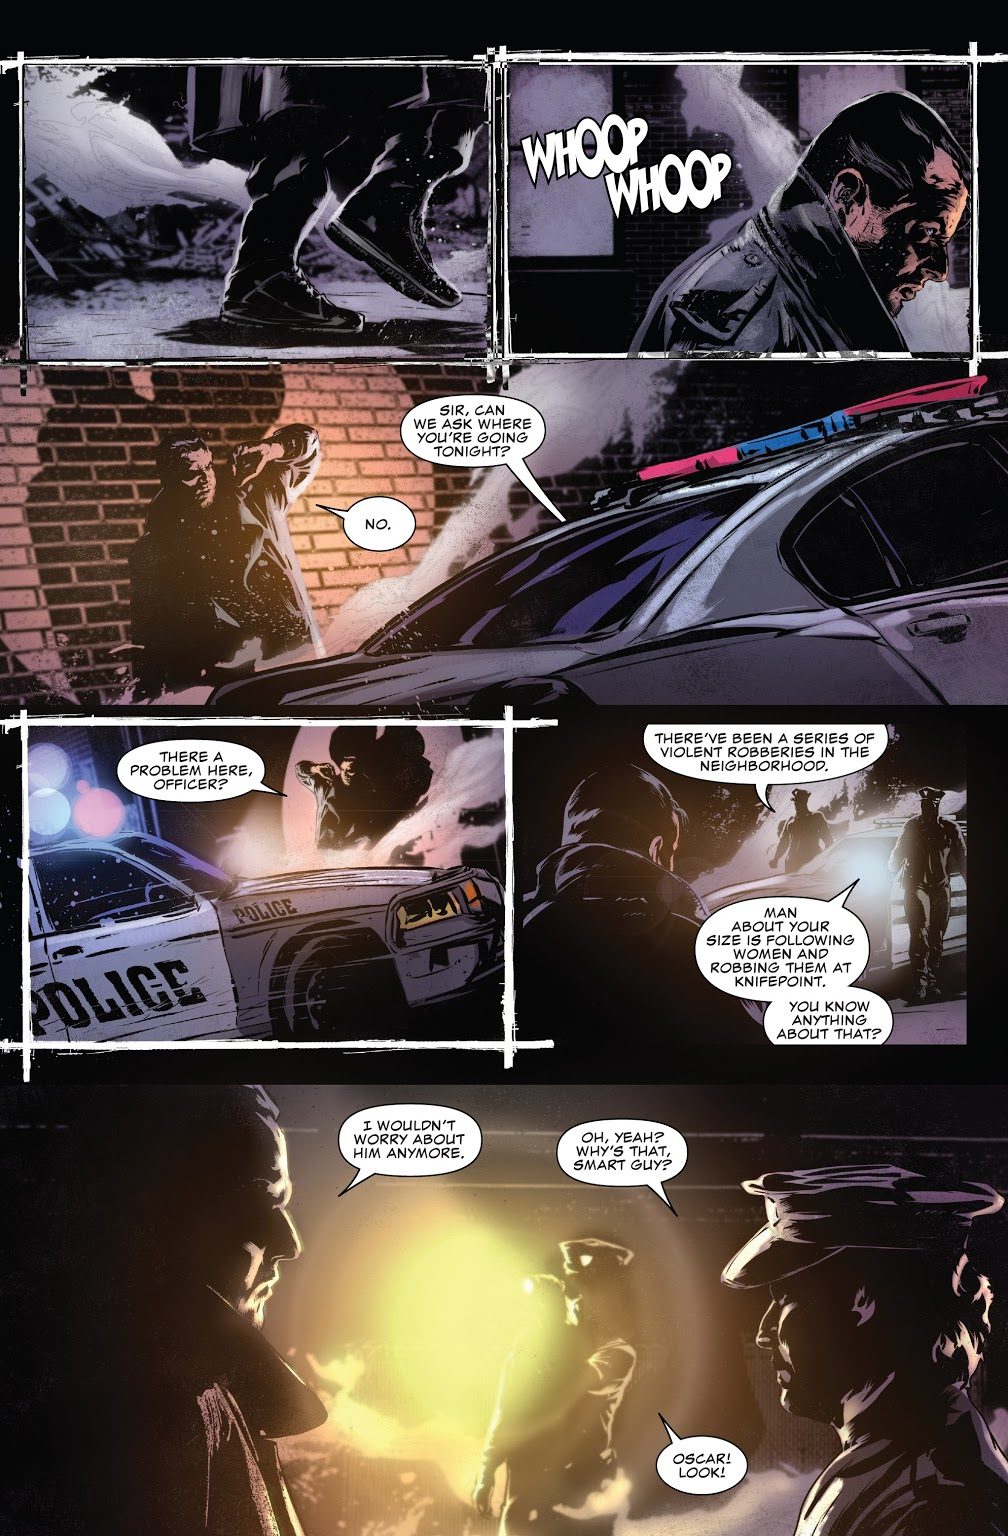 The Punisher Doesn't Want Cops To Copy Him 